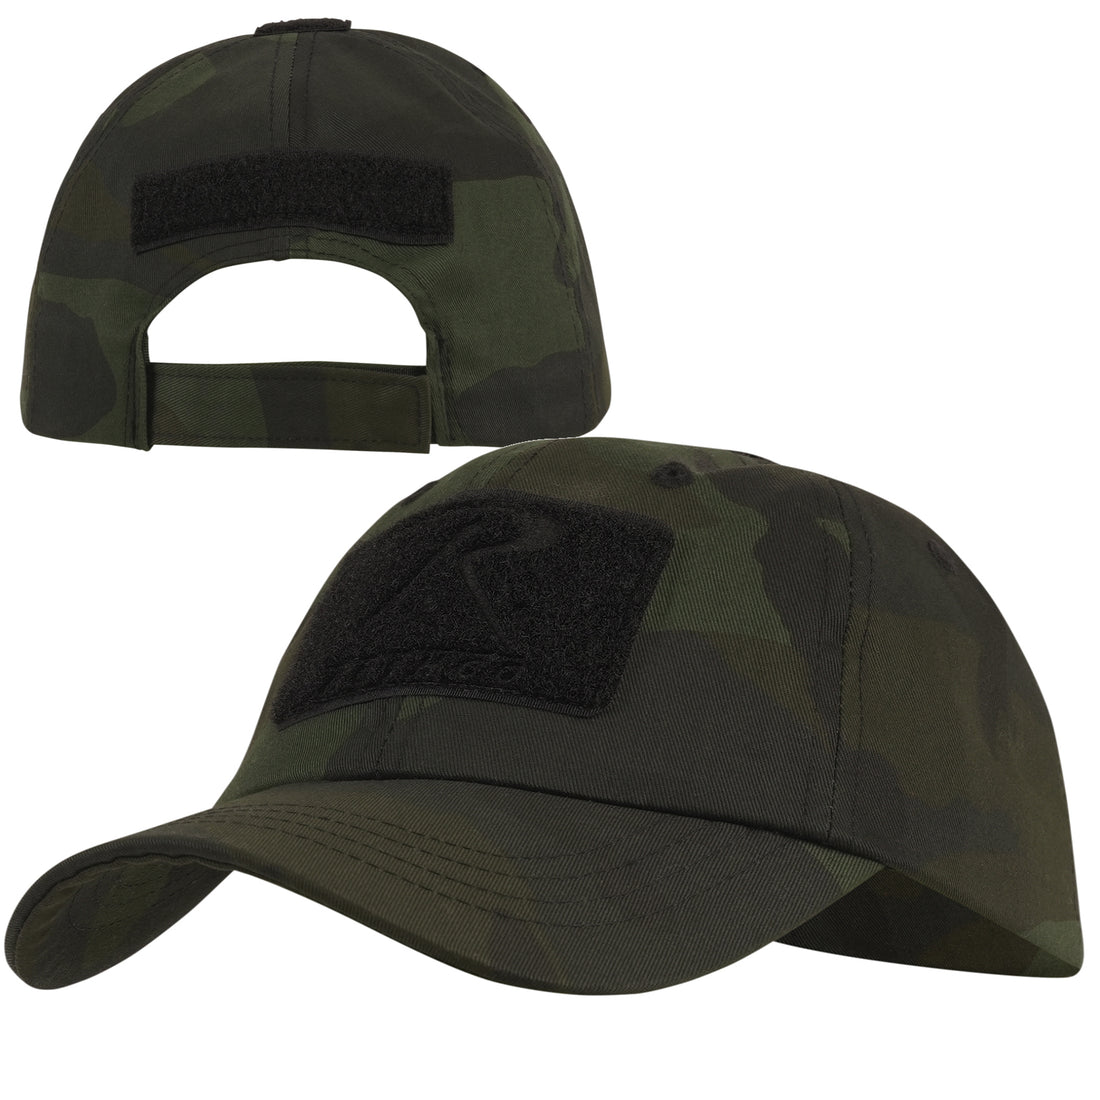 Rothco Tactical Operator Cap in Midnight Woodland Camo!